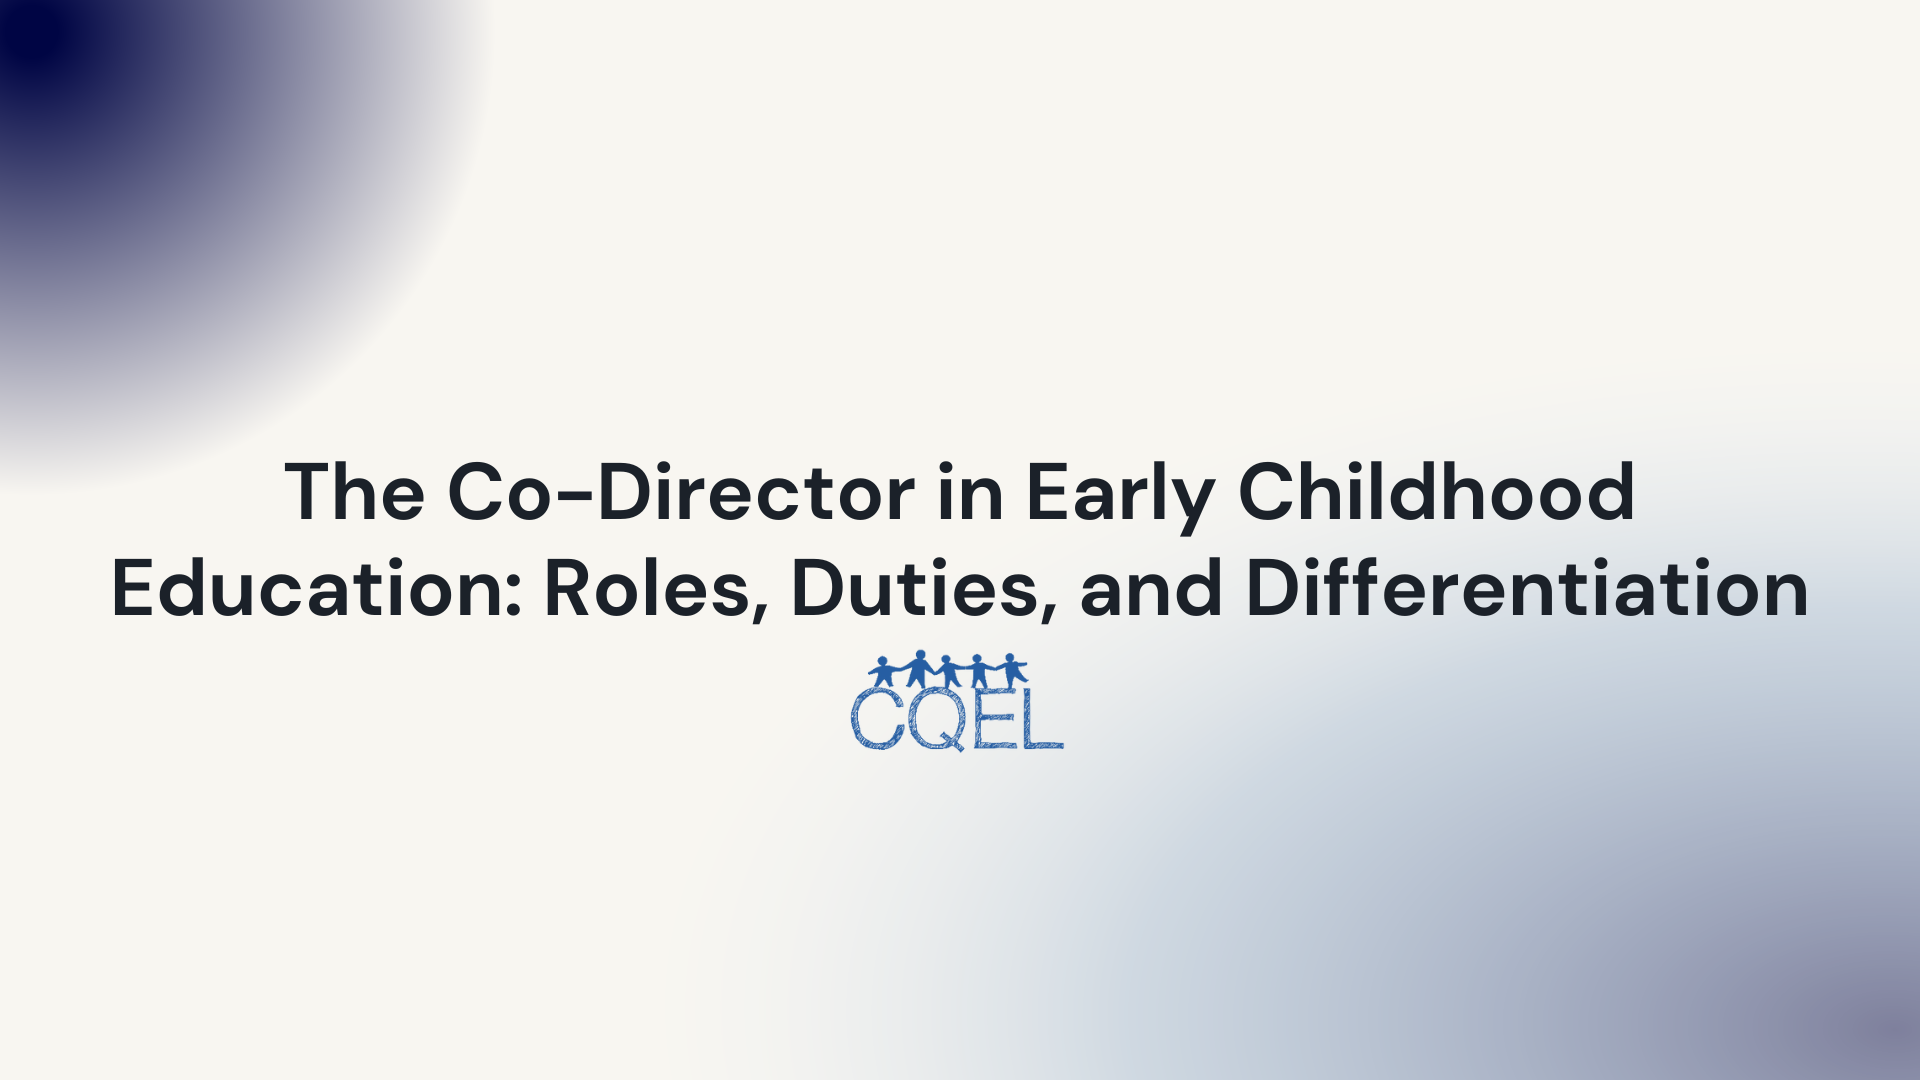 The Co-Director in Early Childhood Education: Roles, Duties, and Differentiation